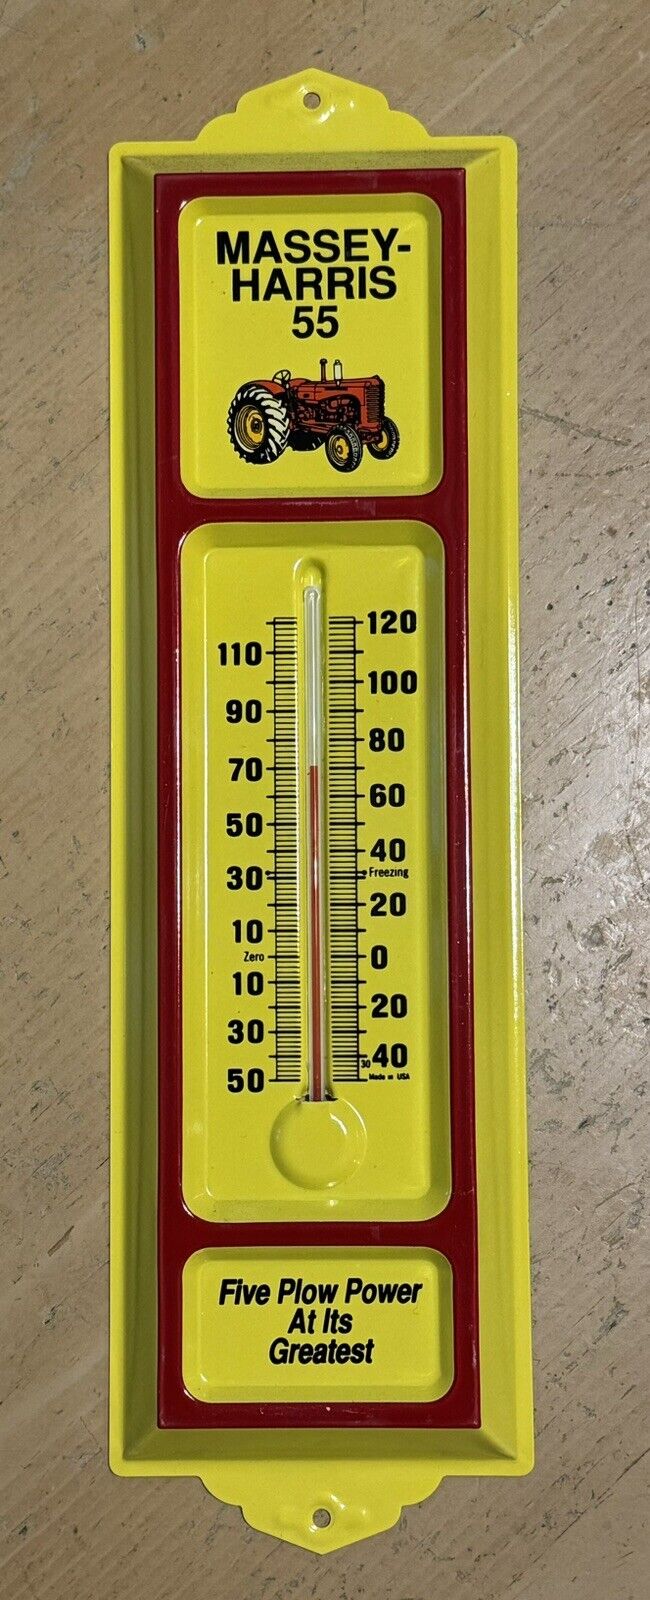 MASSEY - HARRIS 55 TRACTOR METAL THERMOMETER Five Plow Power USA - Old Stock